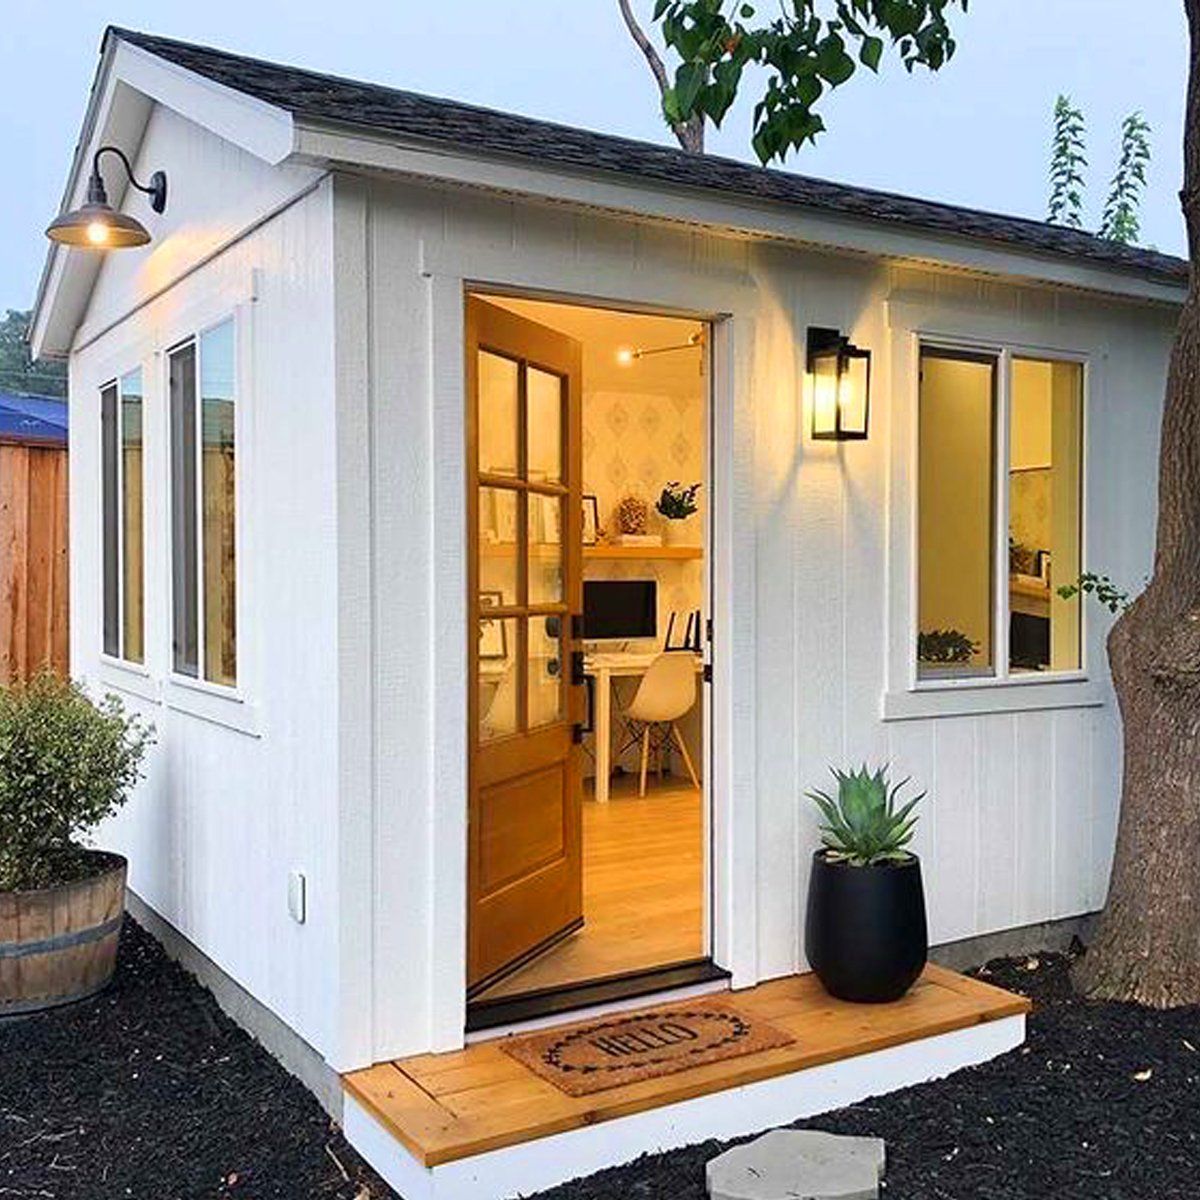 30+ Wonderfully Inspiring She Shed Ideas To Adorn Your Backyard